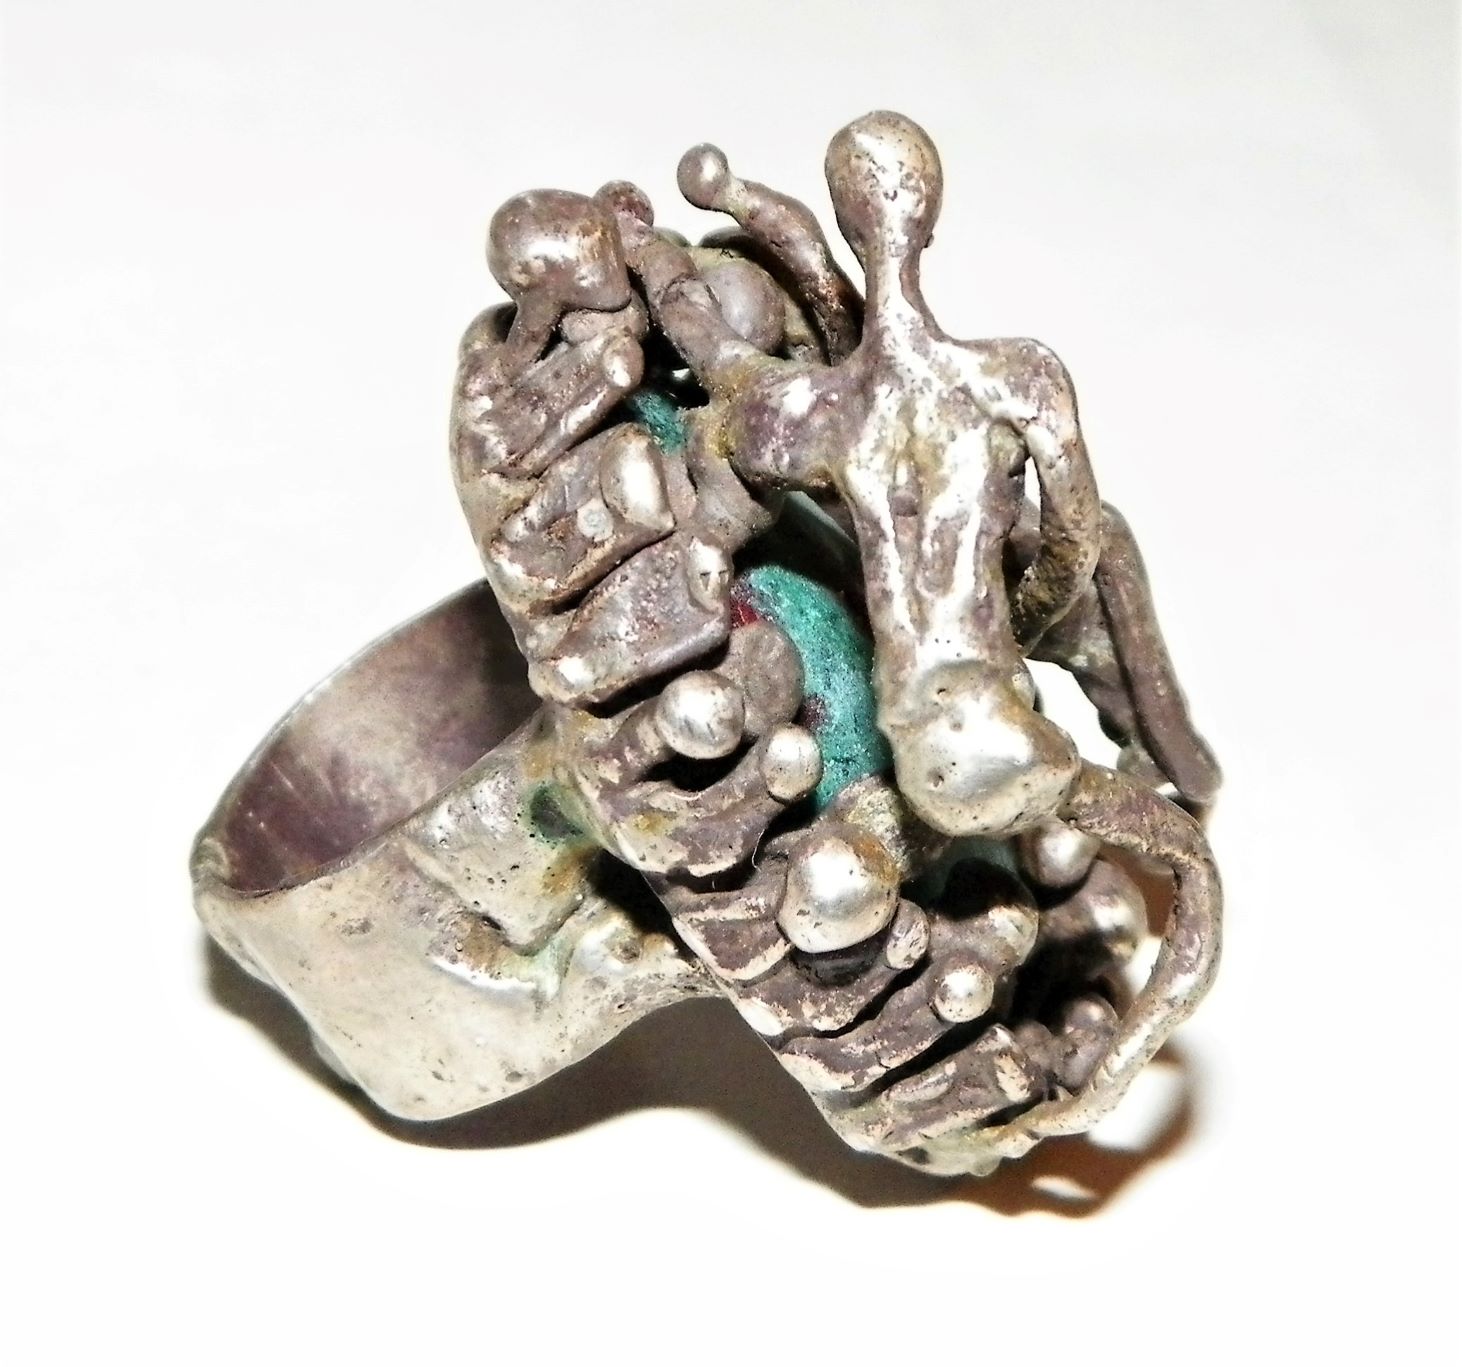 HELP! INFO ON MID CENTURY RING MADE OF BRUTALIST(?) SCULPTURE ...